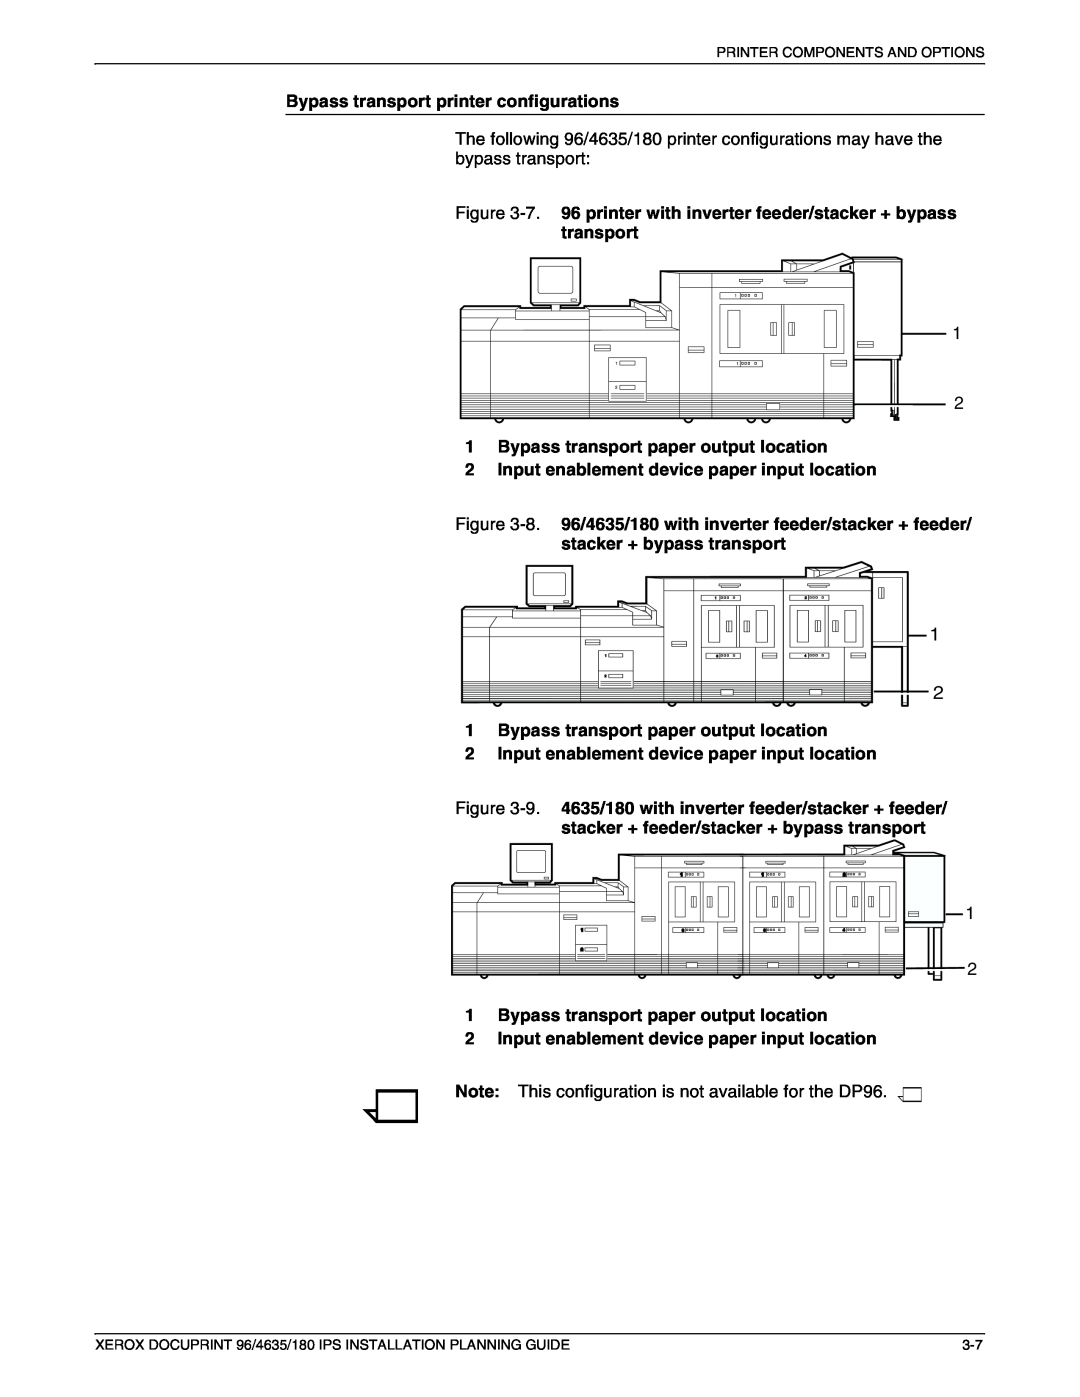 Xerox 180 IPS manual Bypass transport printer configurations, 1Bypass transport paper output location 